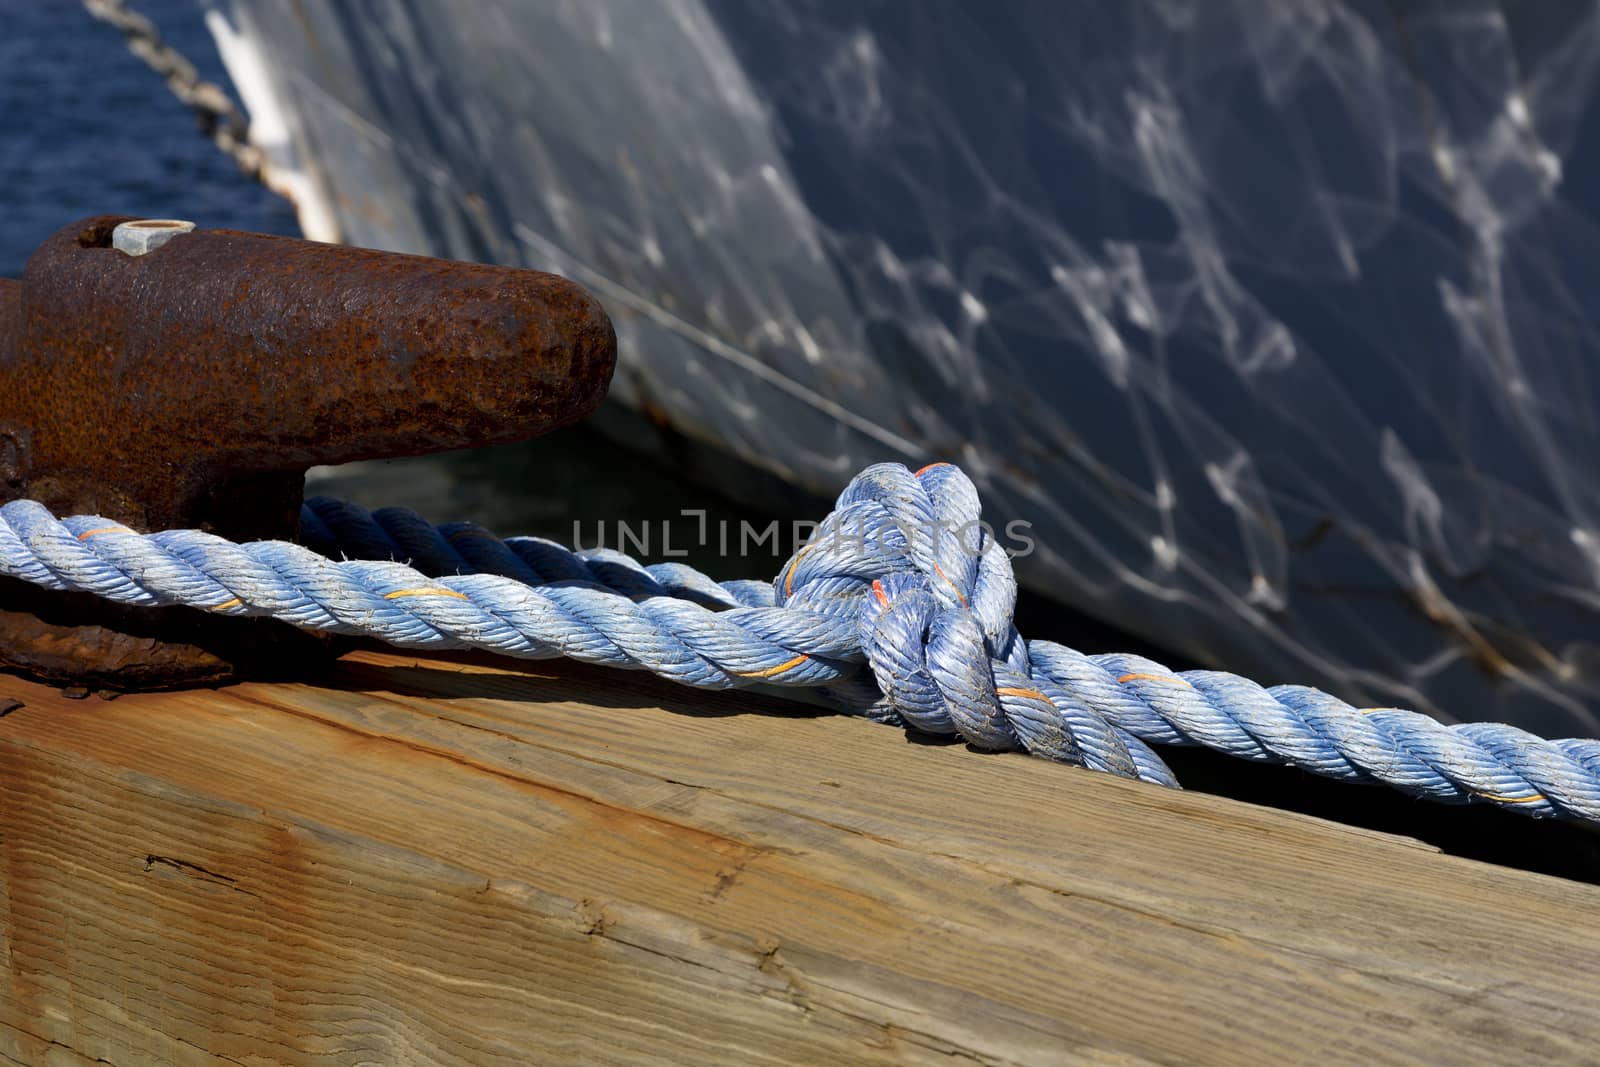 Focus on nautical rope tied to cleat in Newport Marina, Rhode Island, USA.  